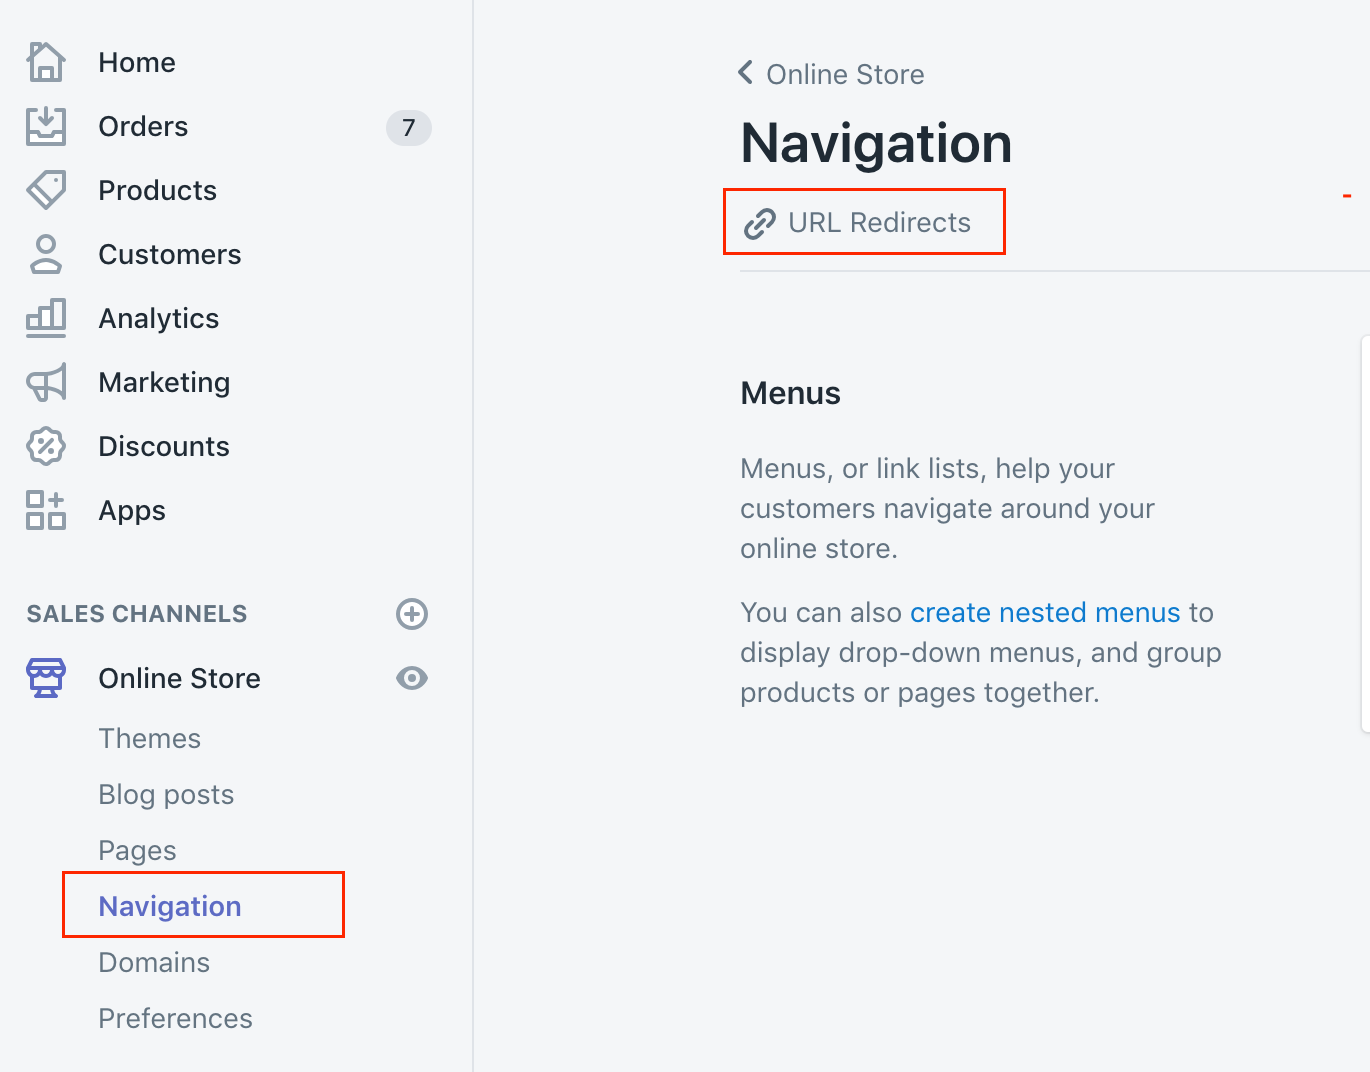 How to redirect customers after login or registration in Shopify